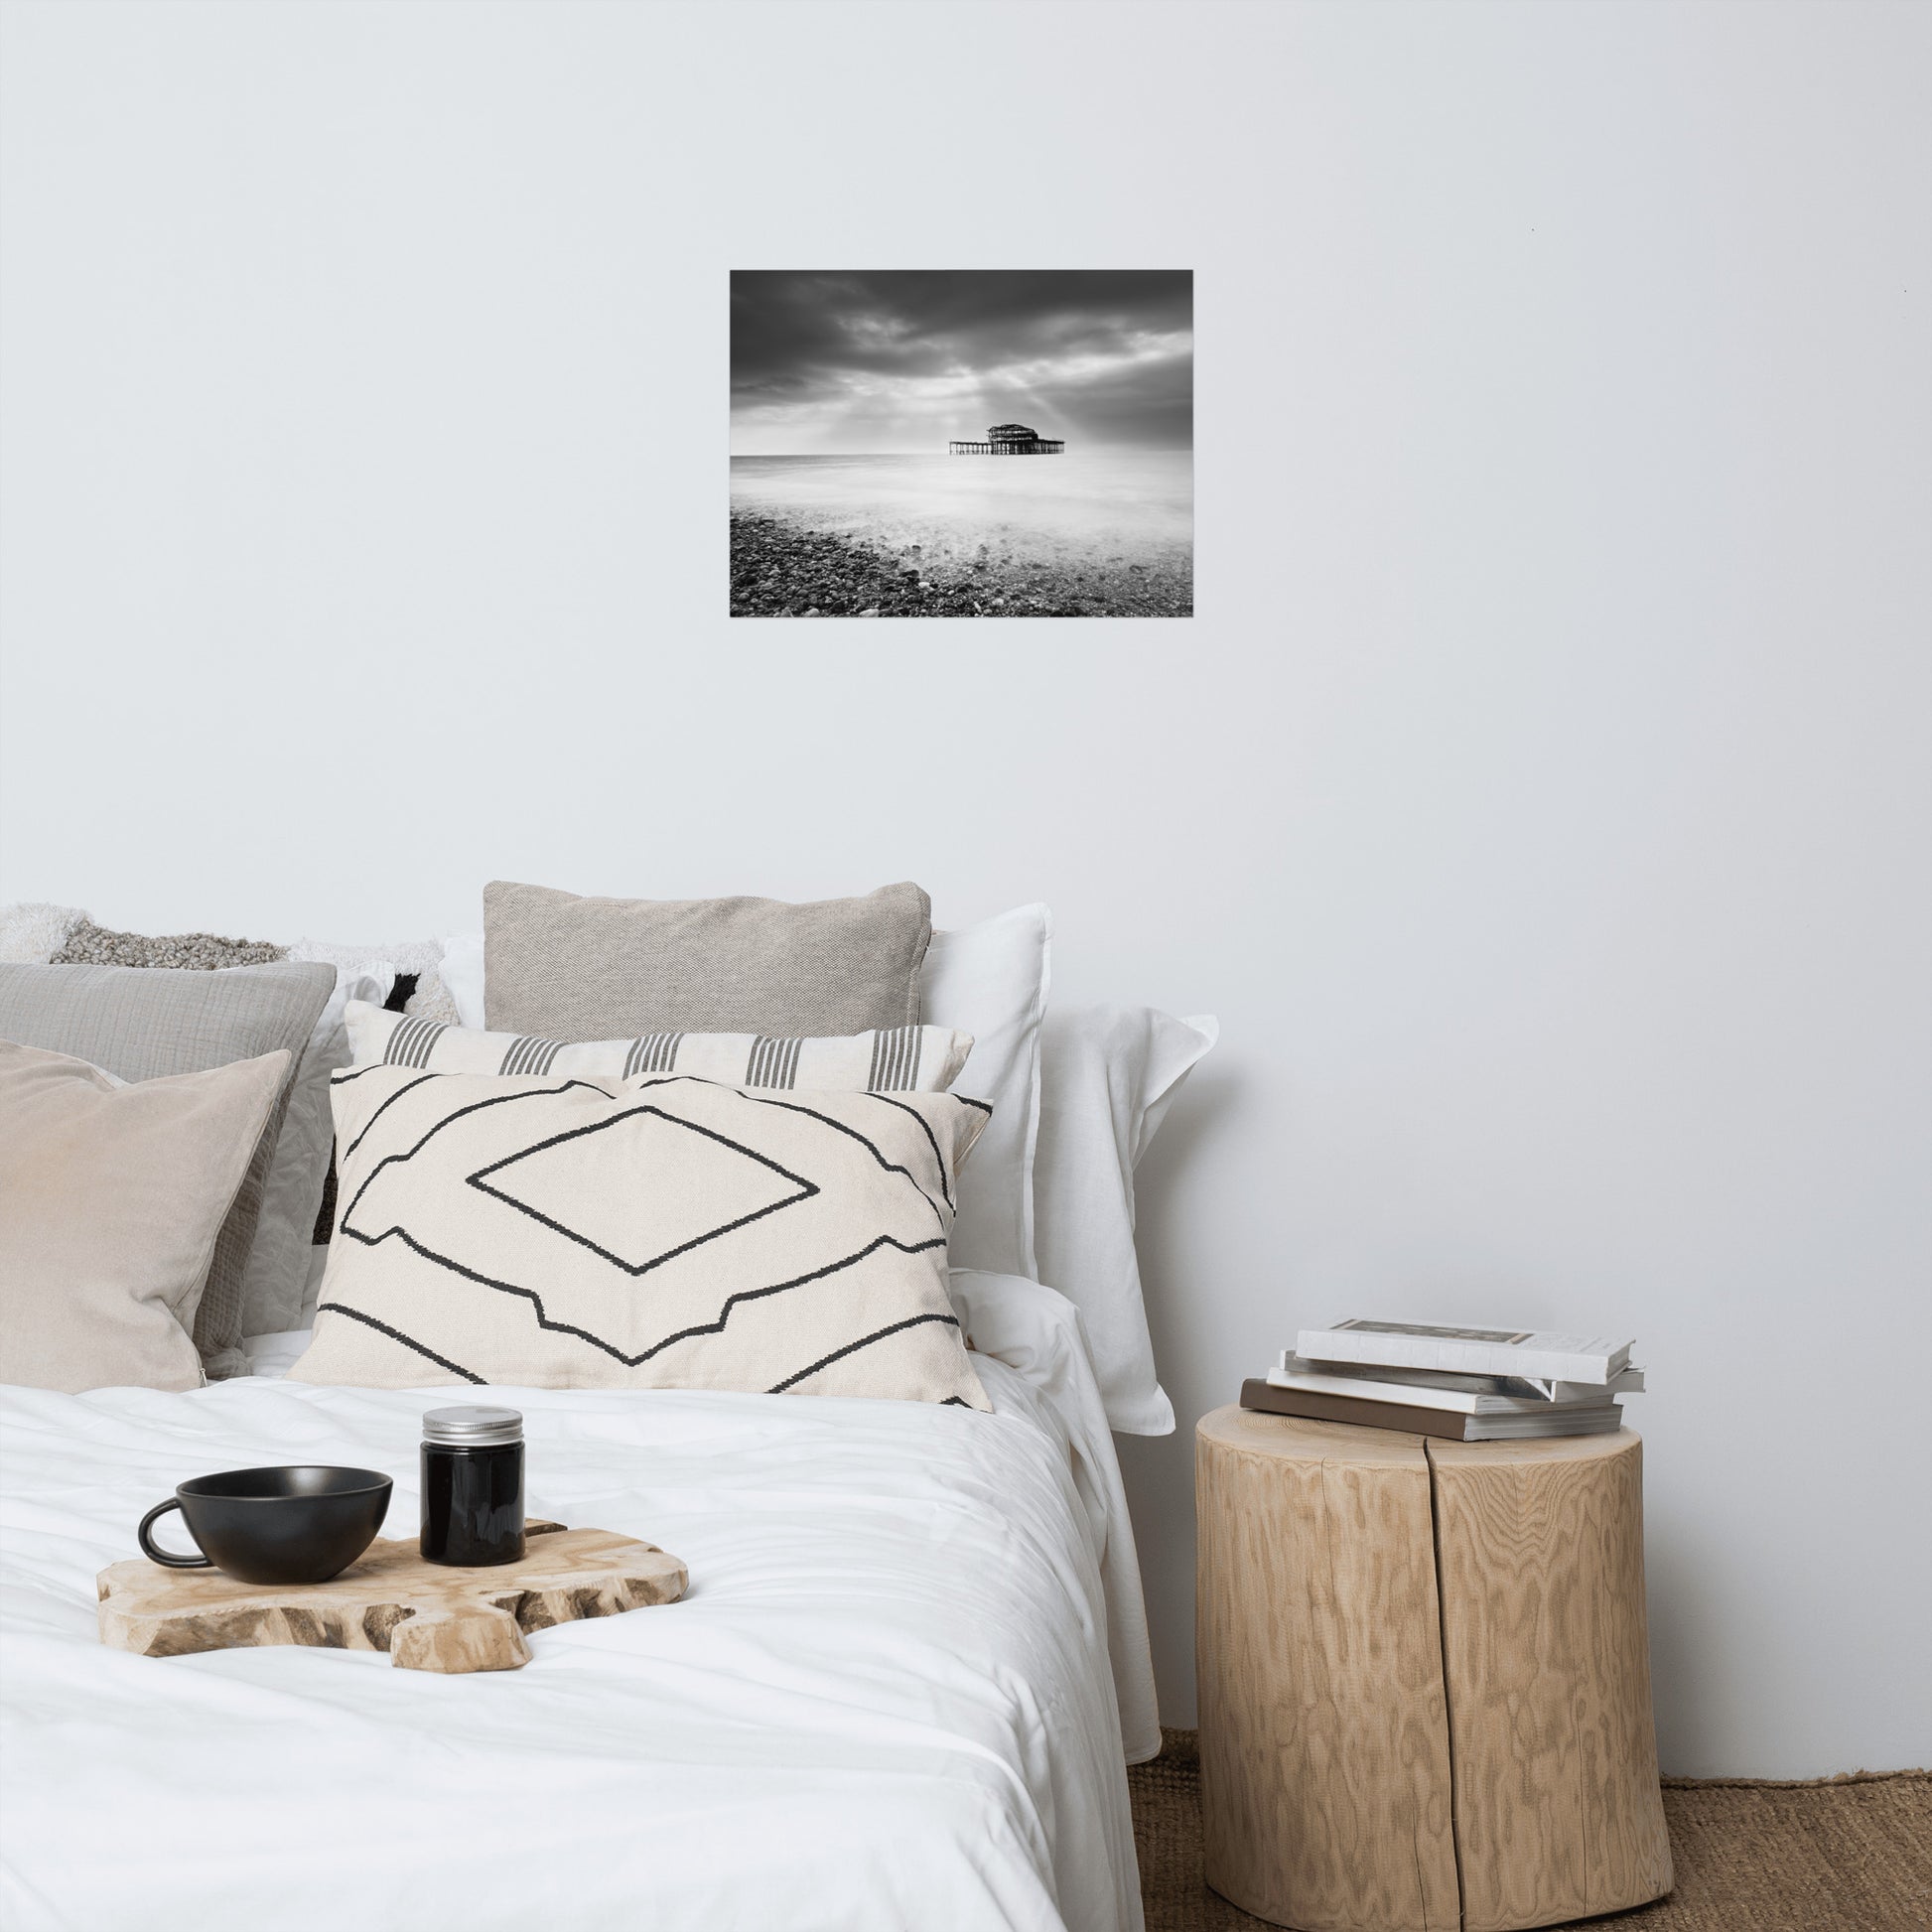 Beach Posters For Room: Abandoned West Pier Coastal Seascape Black and White Landscape Photo Loose Wall Art Prints